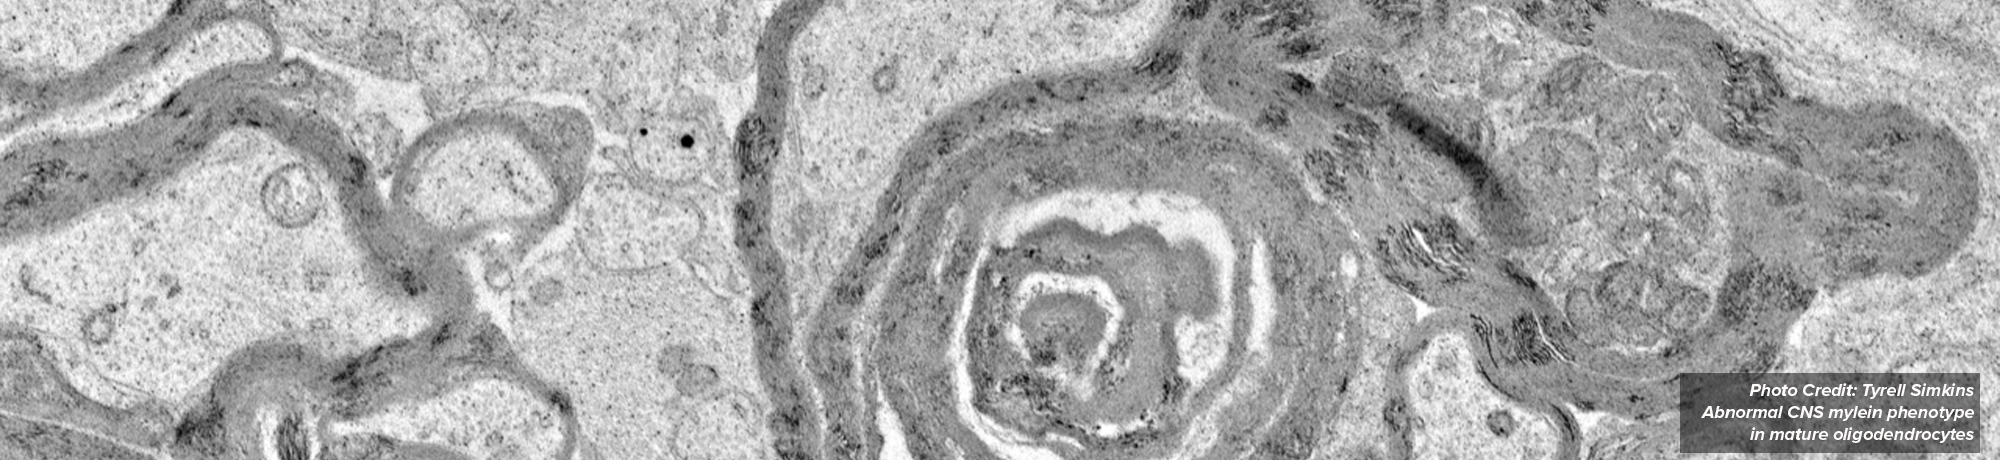 Abnormal CNS myelin phenotype in mature oligodendrocytes captured by electron microscopy